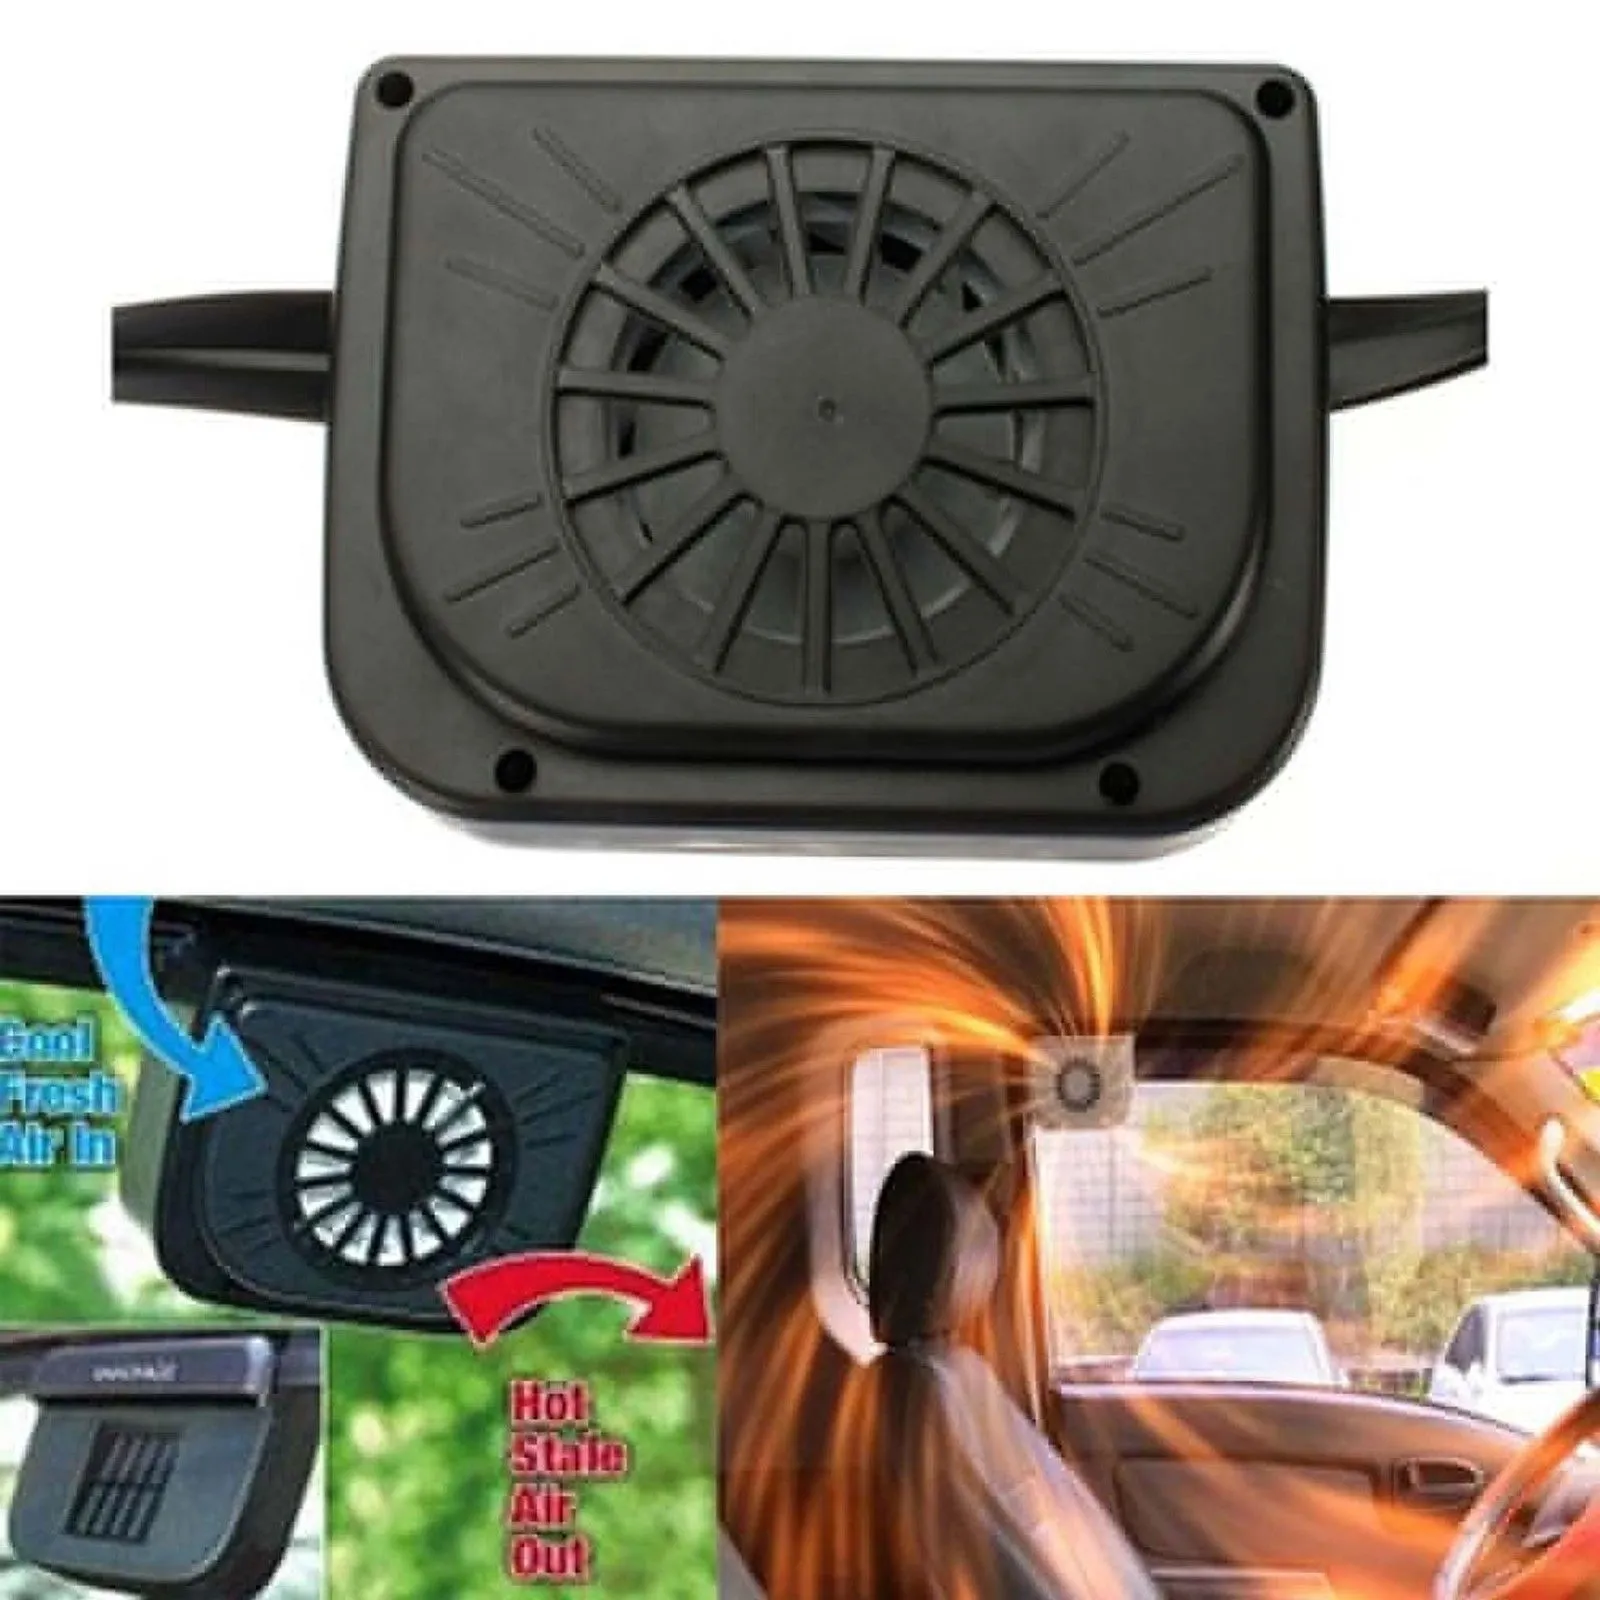 New Solar Powered Car Window Windshield Auto Air Vent Cooling Fan Cooler Radiator Air Conditioner Ventilation Gills Cooler